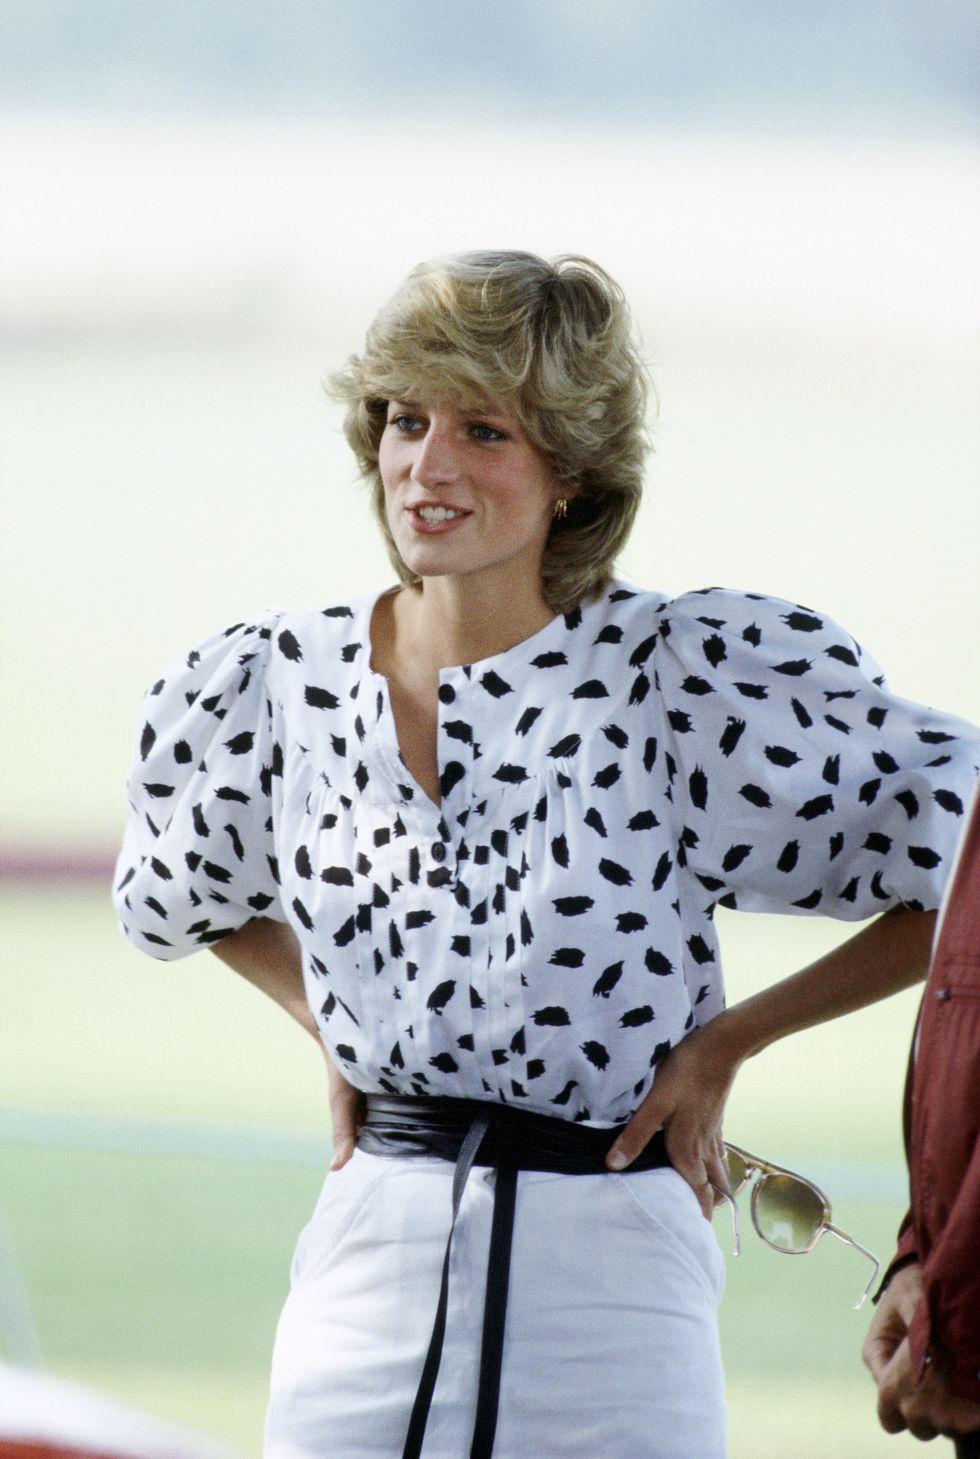 diana spencer at a polo match in a white patterned top and white skirt